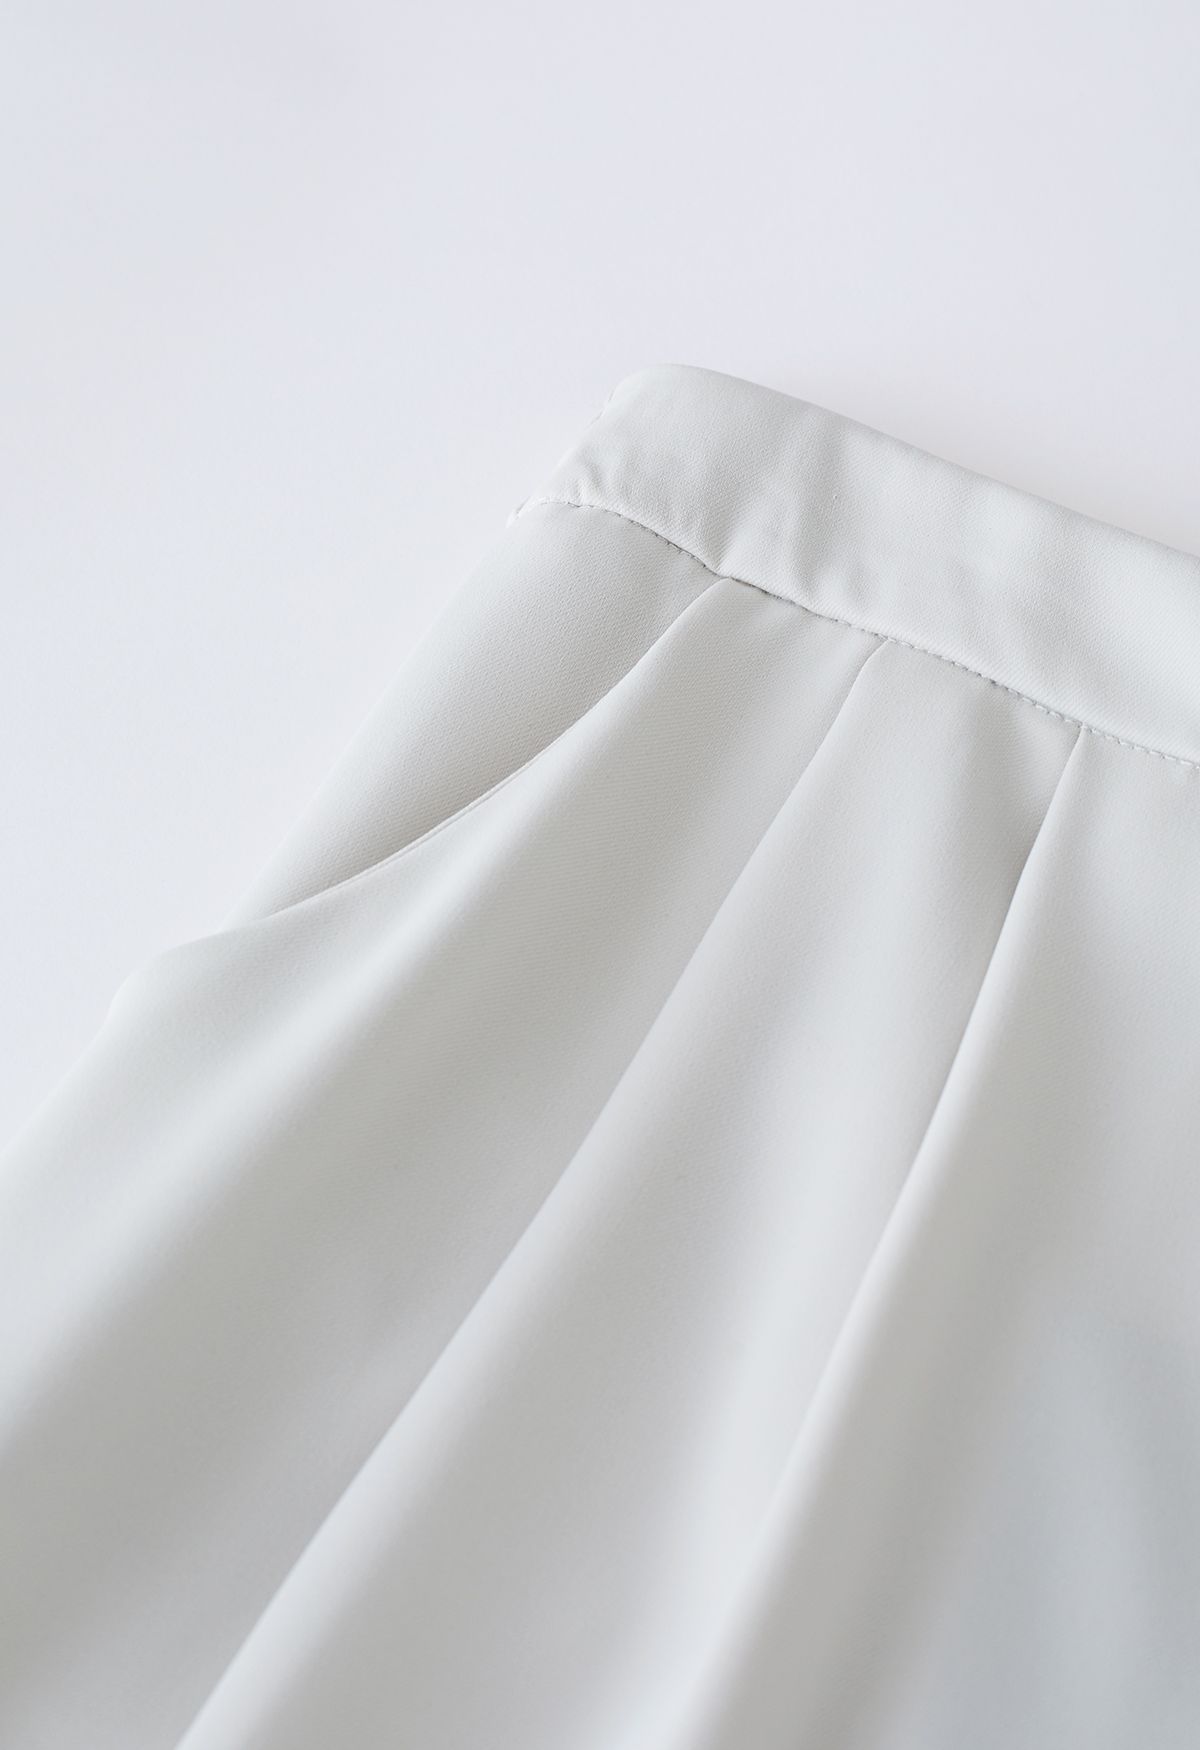 Drawstring Waist Pleated Detailing Pants in Ivory